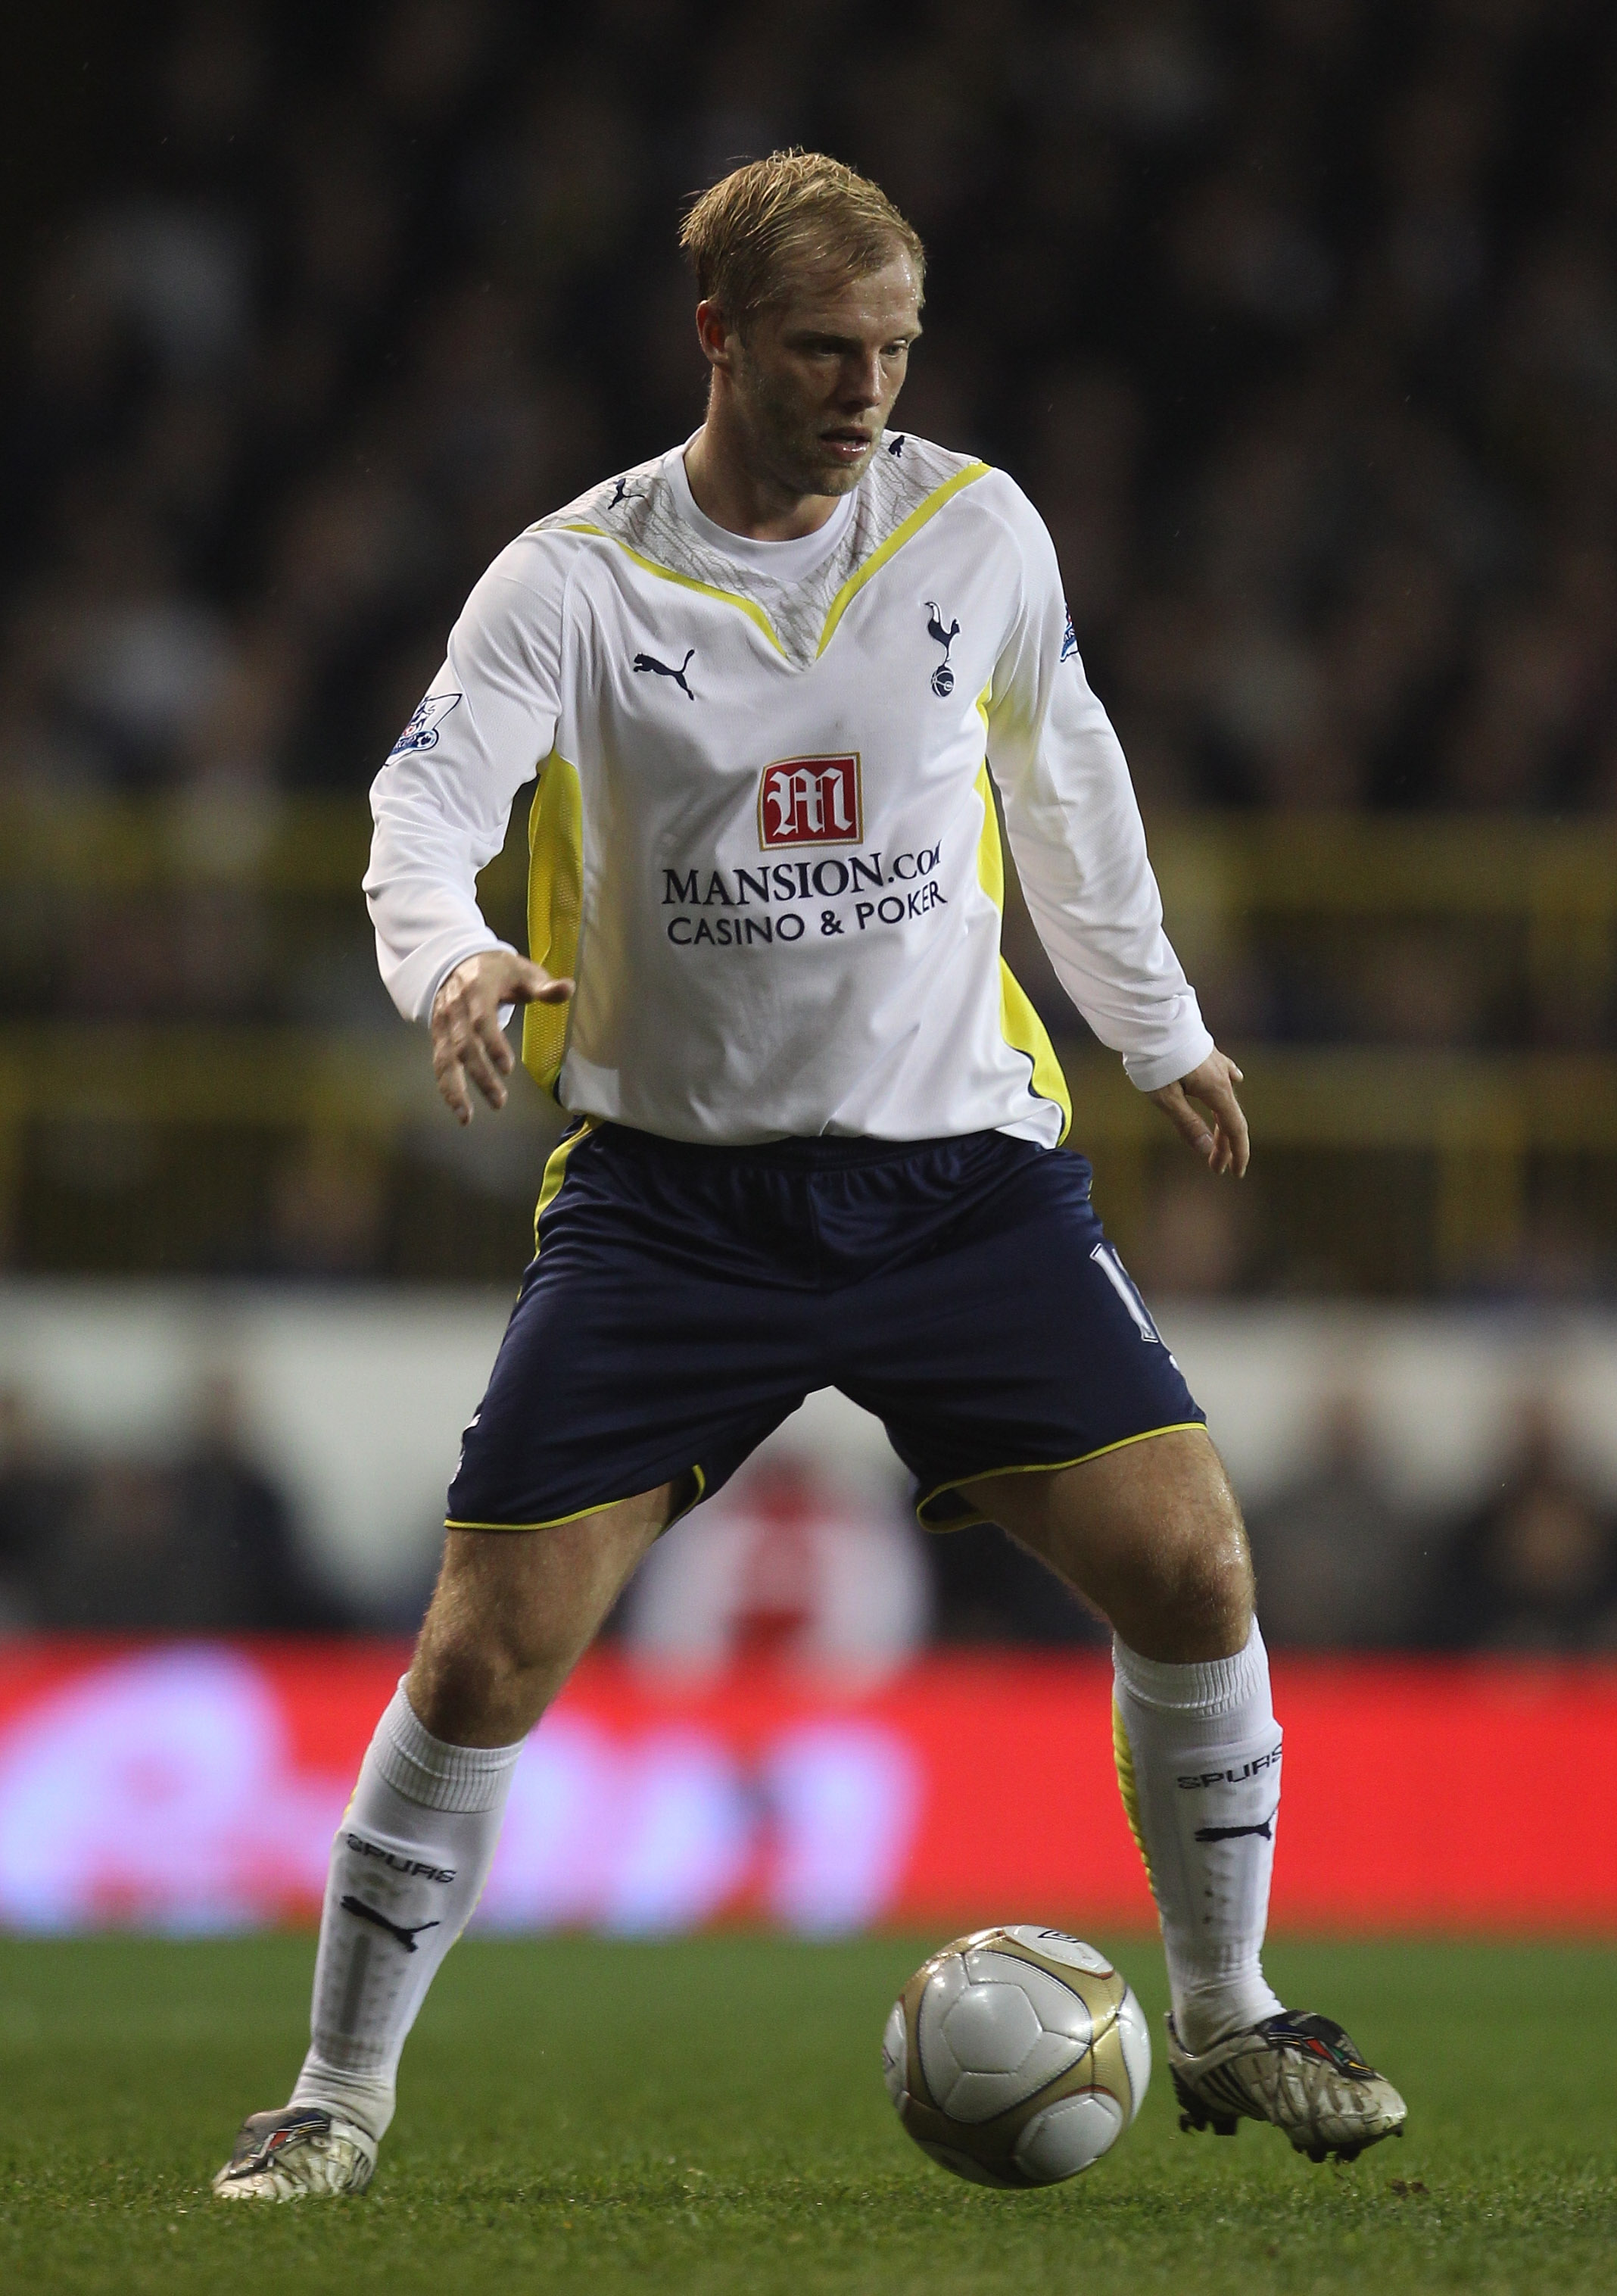 LONDON, ENGLAND - MARCH 24:  Eidur Gudjohnsen of Spurs in action during the FA Cup Quarter Final Replay match between Tottenham Hotspur and Fulham at White Hart Lane on March 24, 2010 in London, England.  (Photo by Julian Finney/Getty Images)